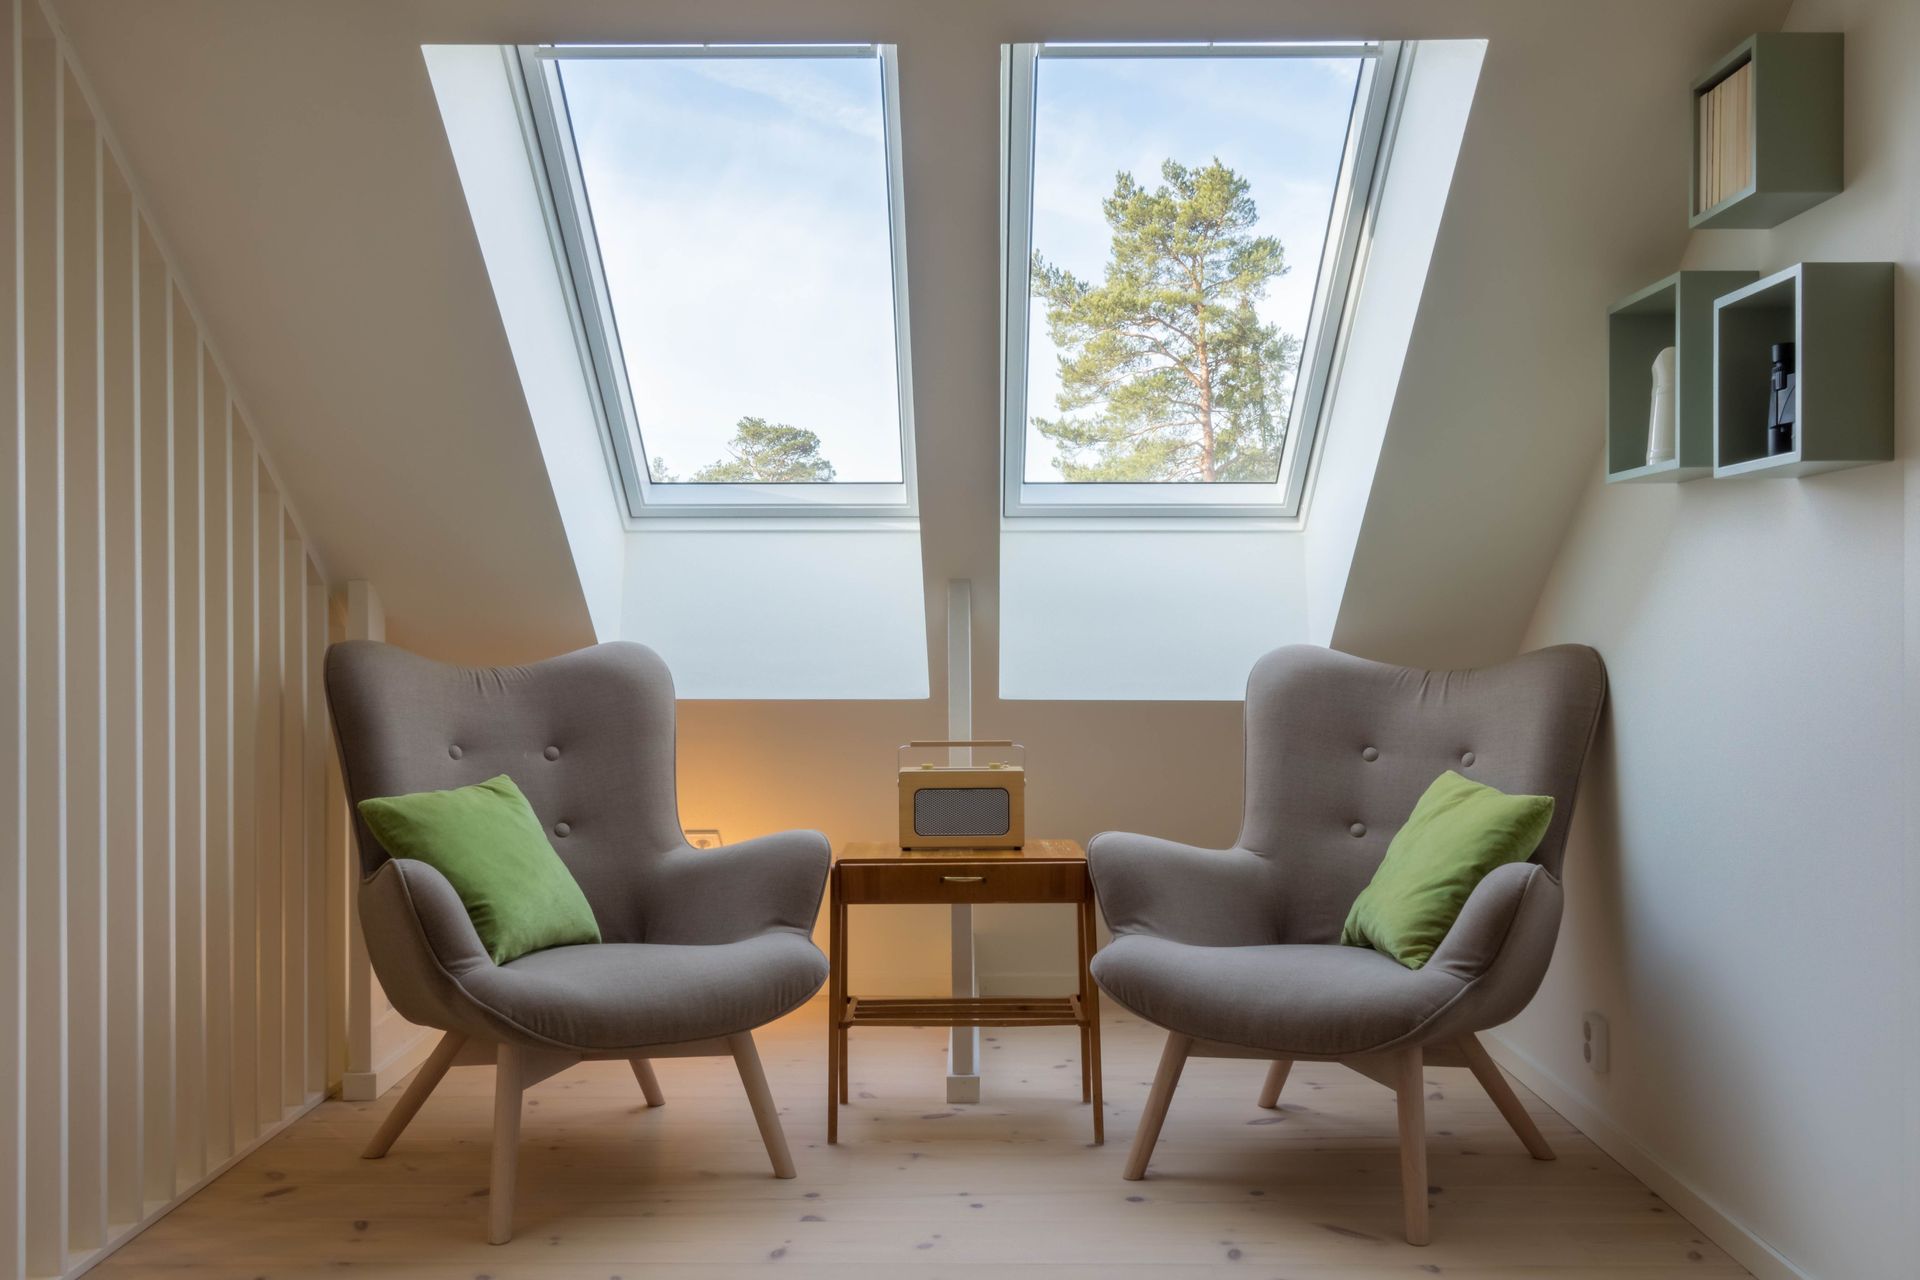 Two chairs are sitting next to each other in a room with skylights